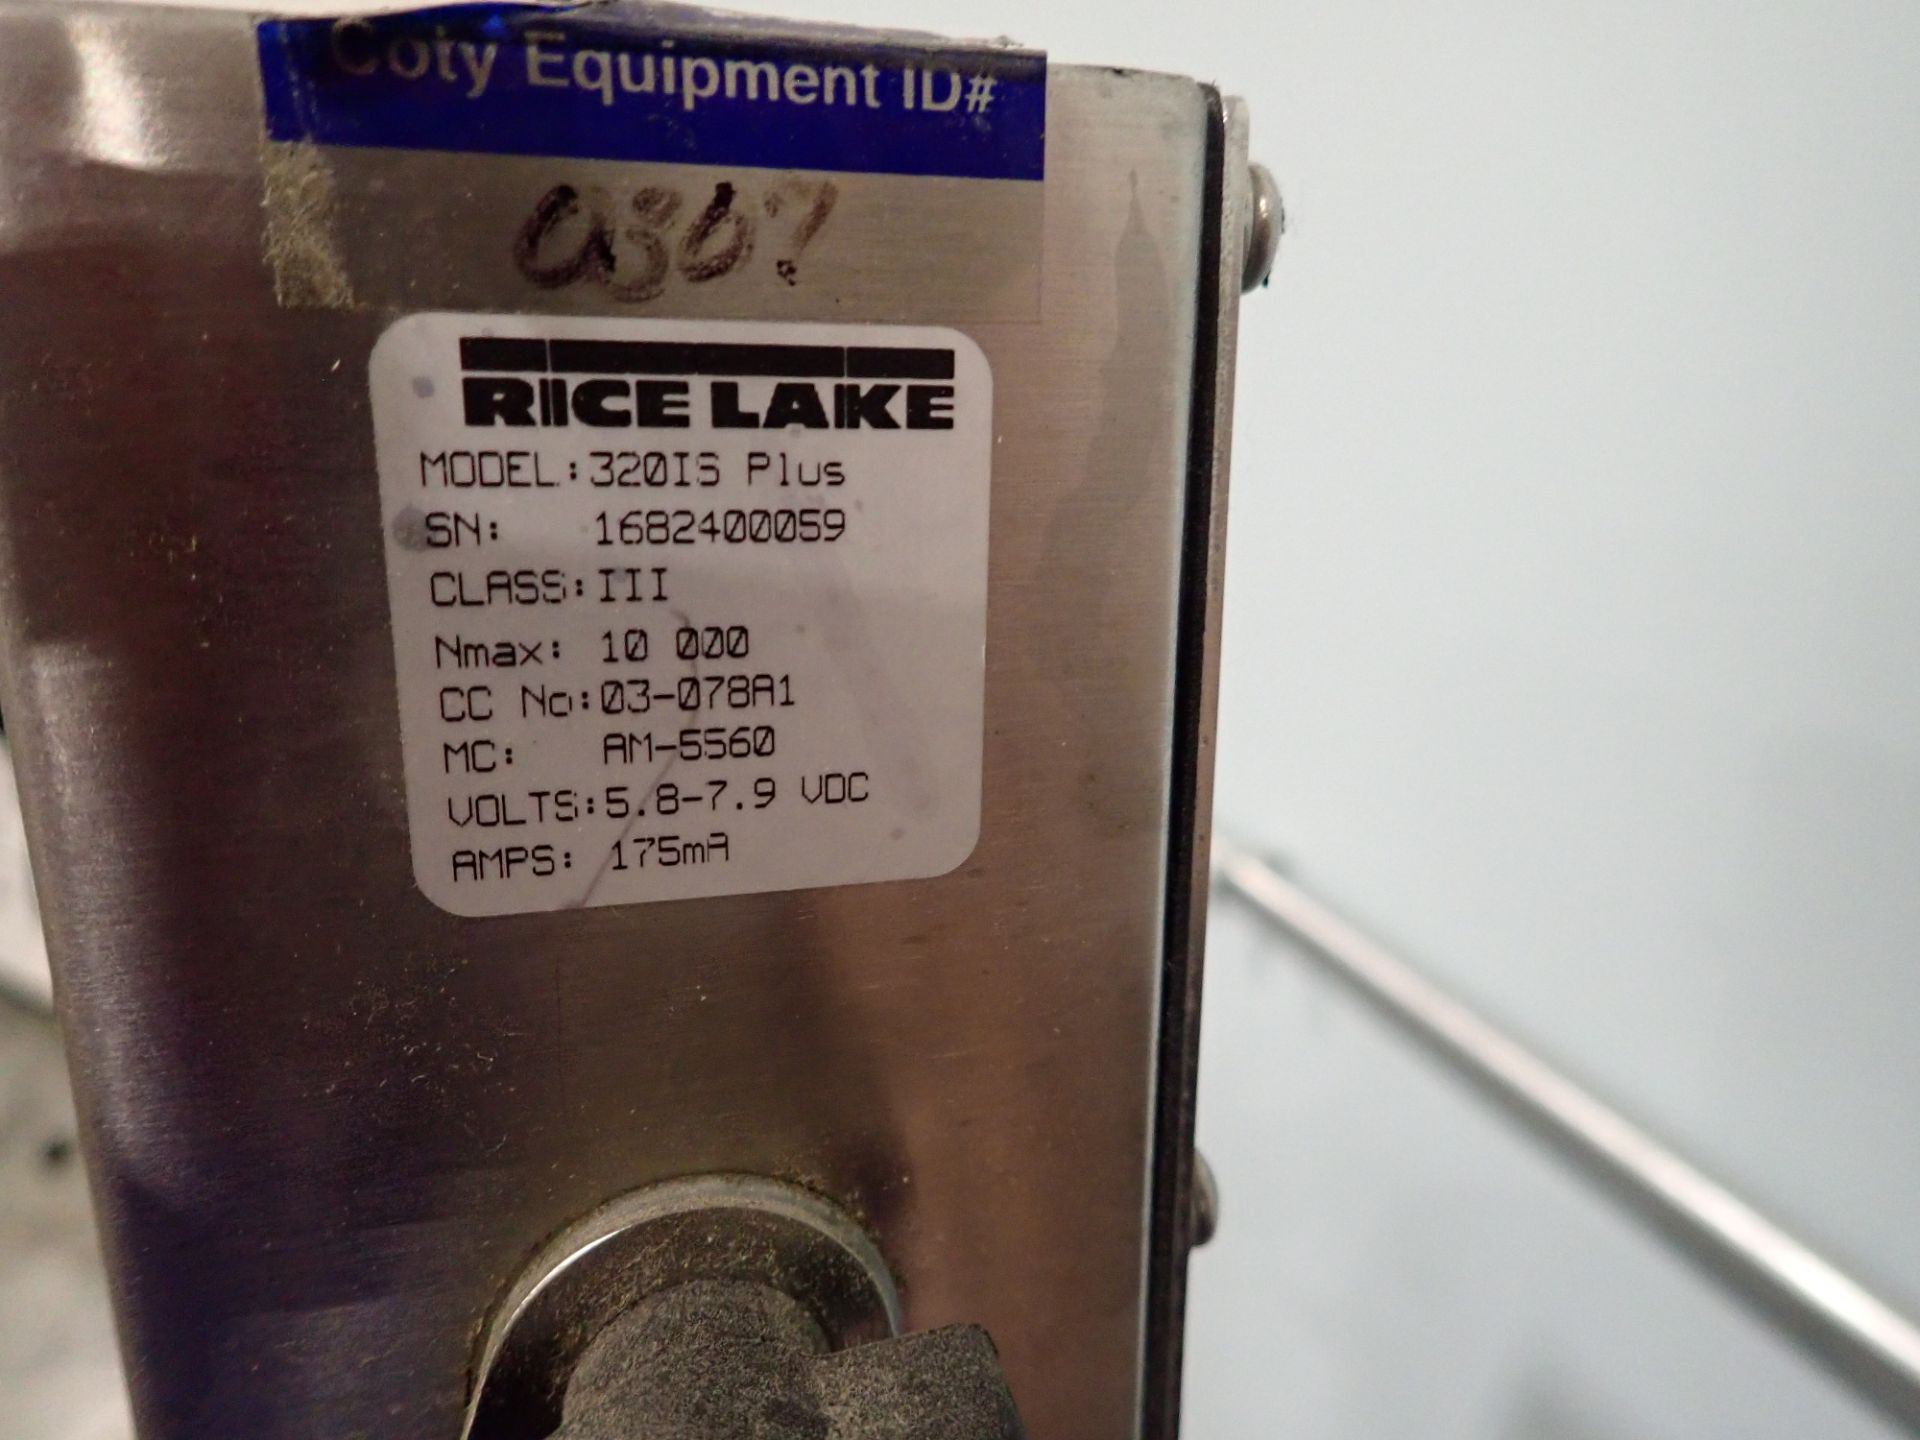 Rice Lake Rough Deck Floor Scale with 320IS Plus Weight Indicator - Image 6 of 6